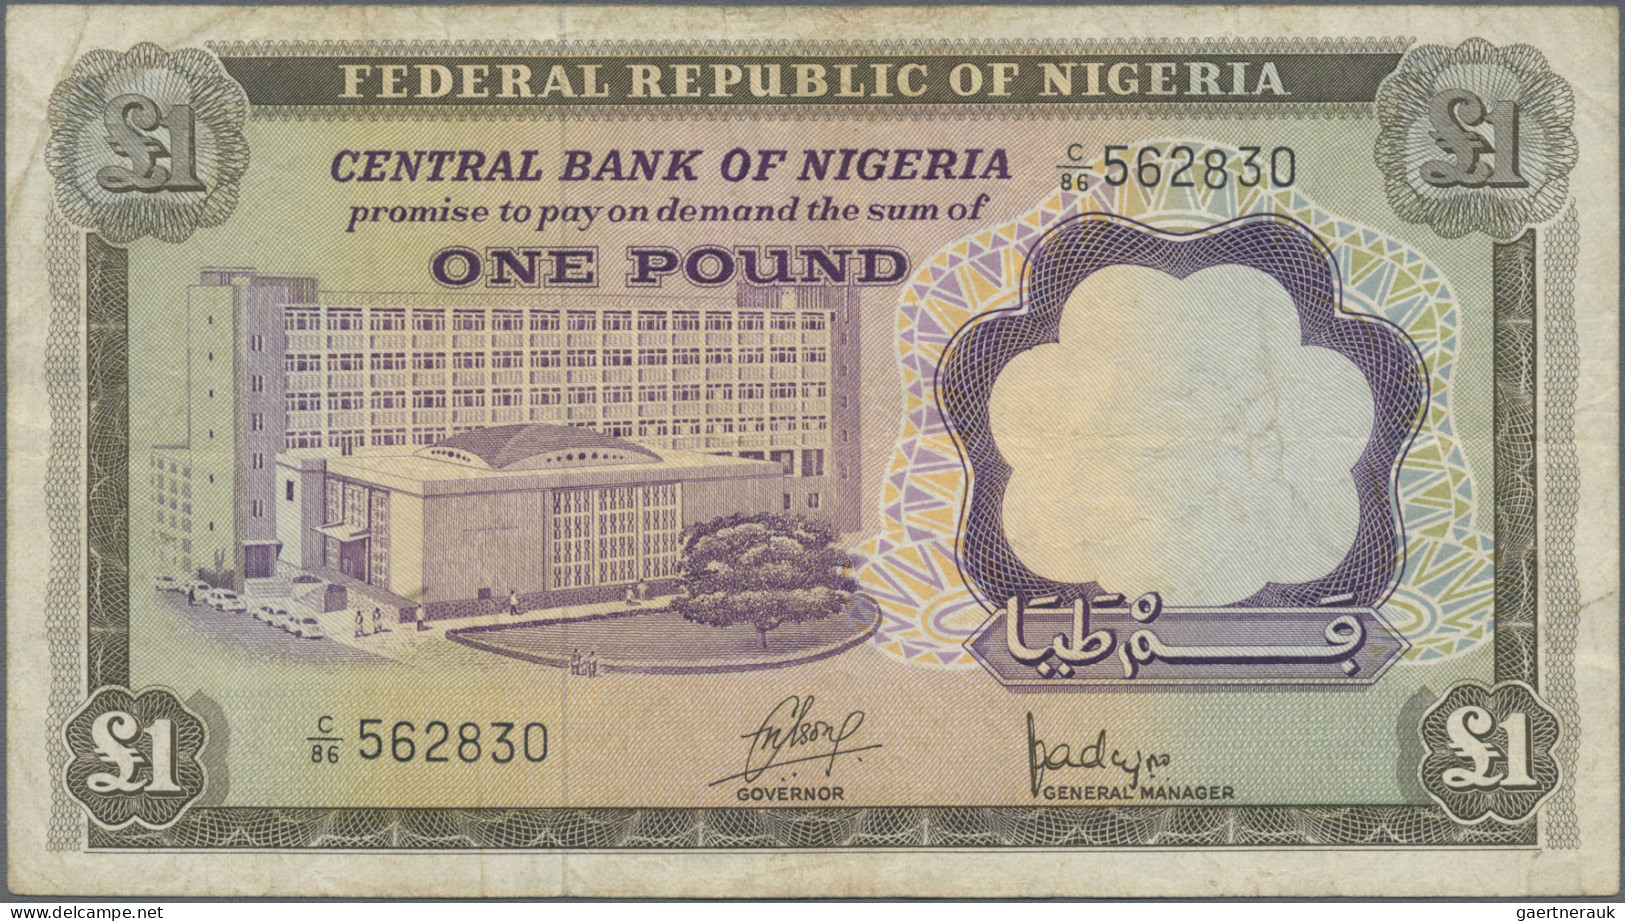 Nigeria: Central Bank of Nigeria, lot with 5 banknotes, series 1967/68, with 1 P